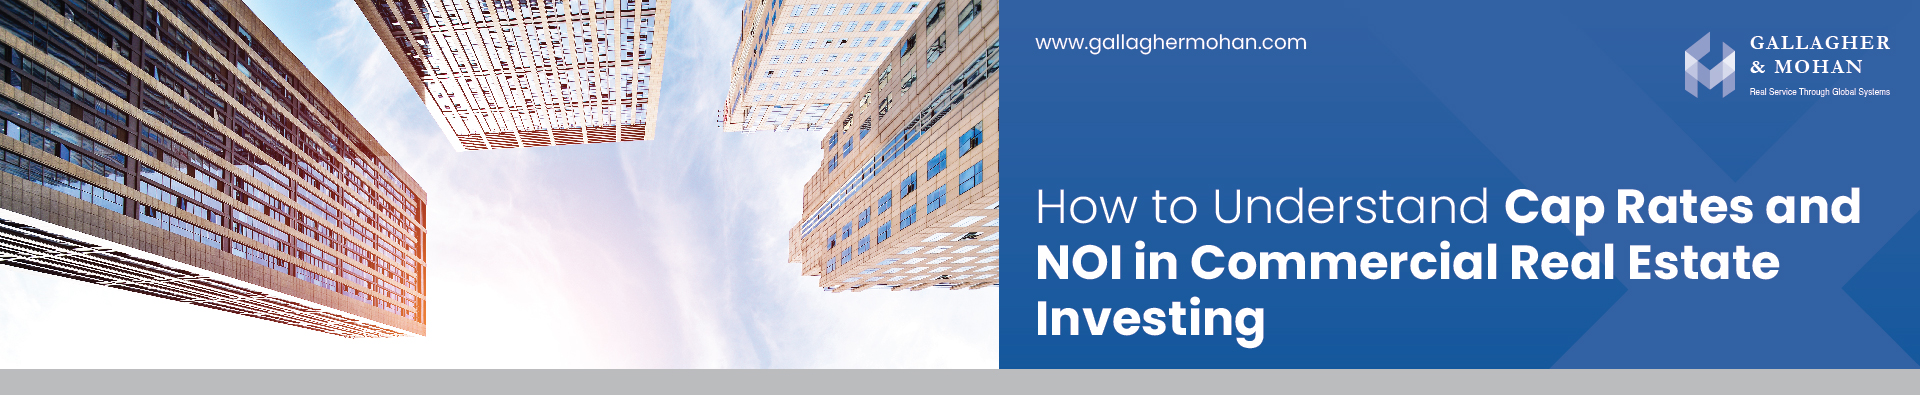 How To Understand Cap Rates And NOI In Commercial Real Estate Investing